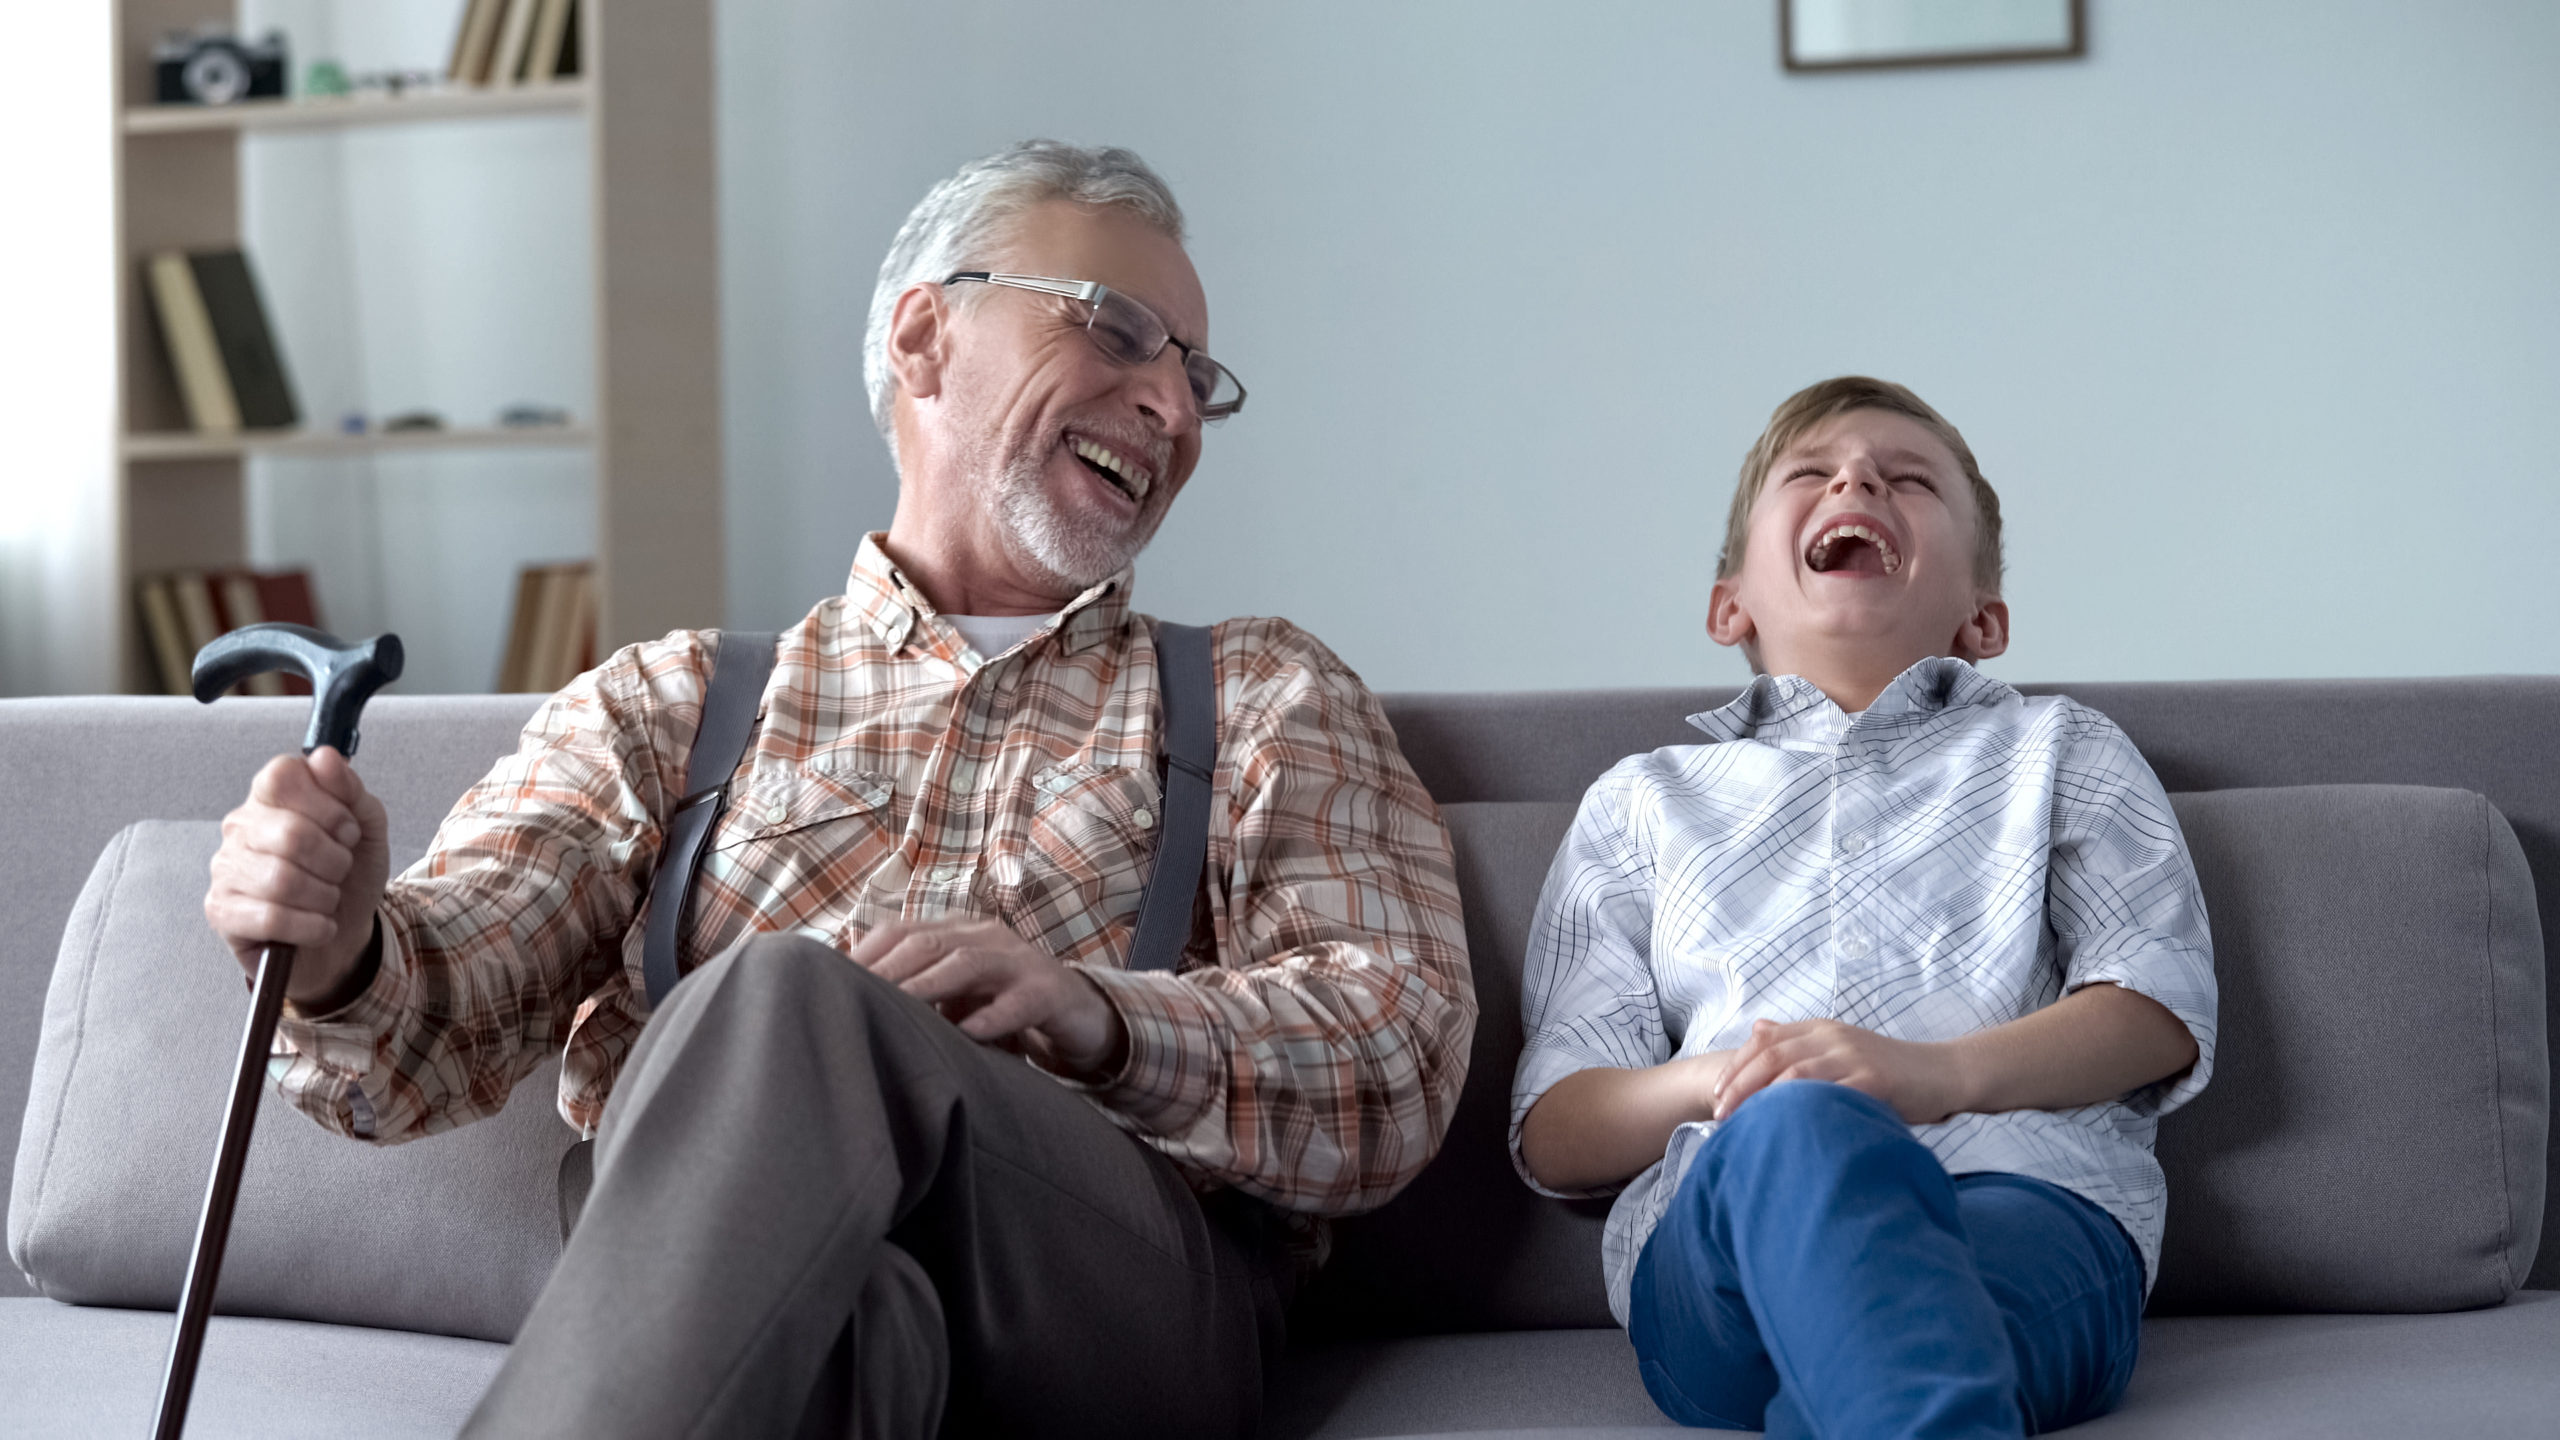 Old man and boy laughing genuinely, joking, valuable fun moments together